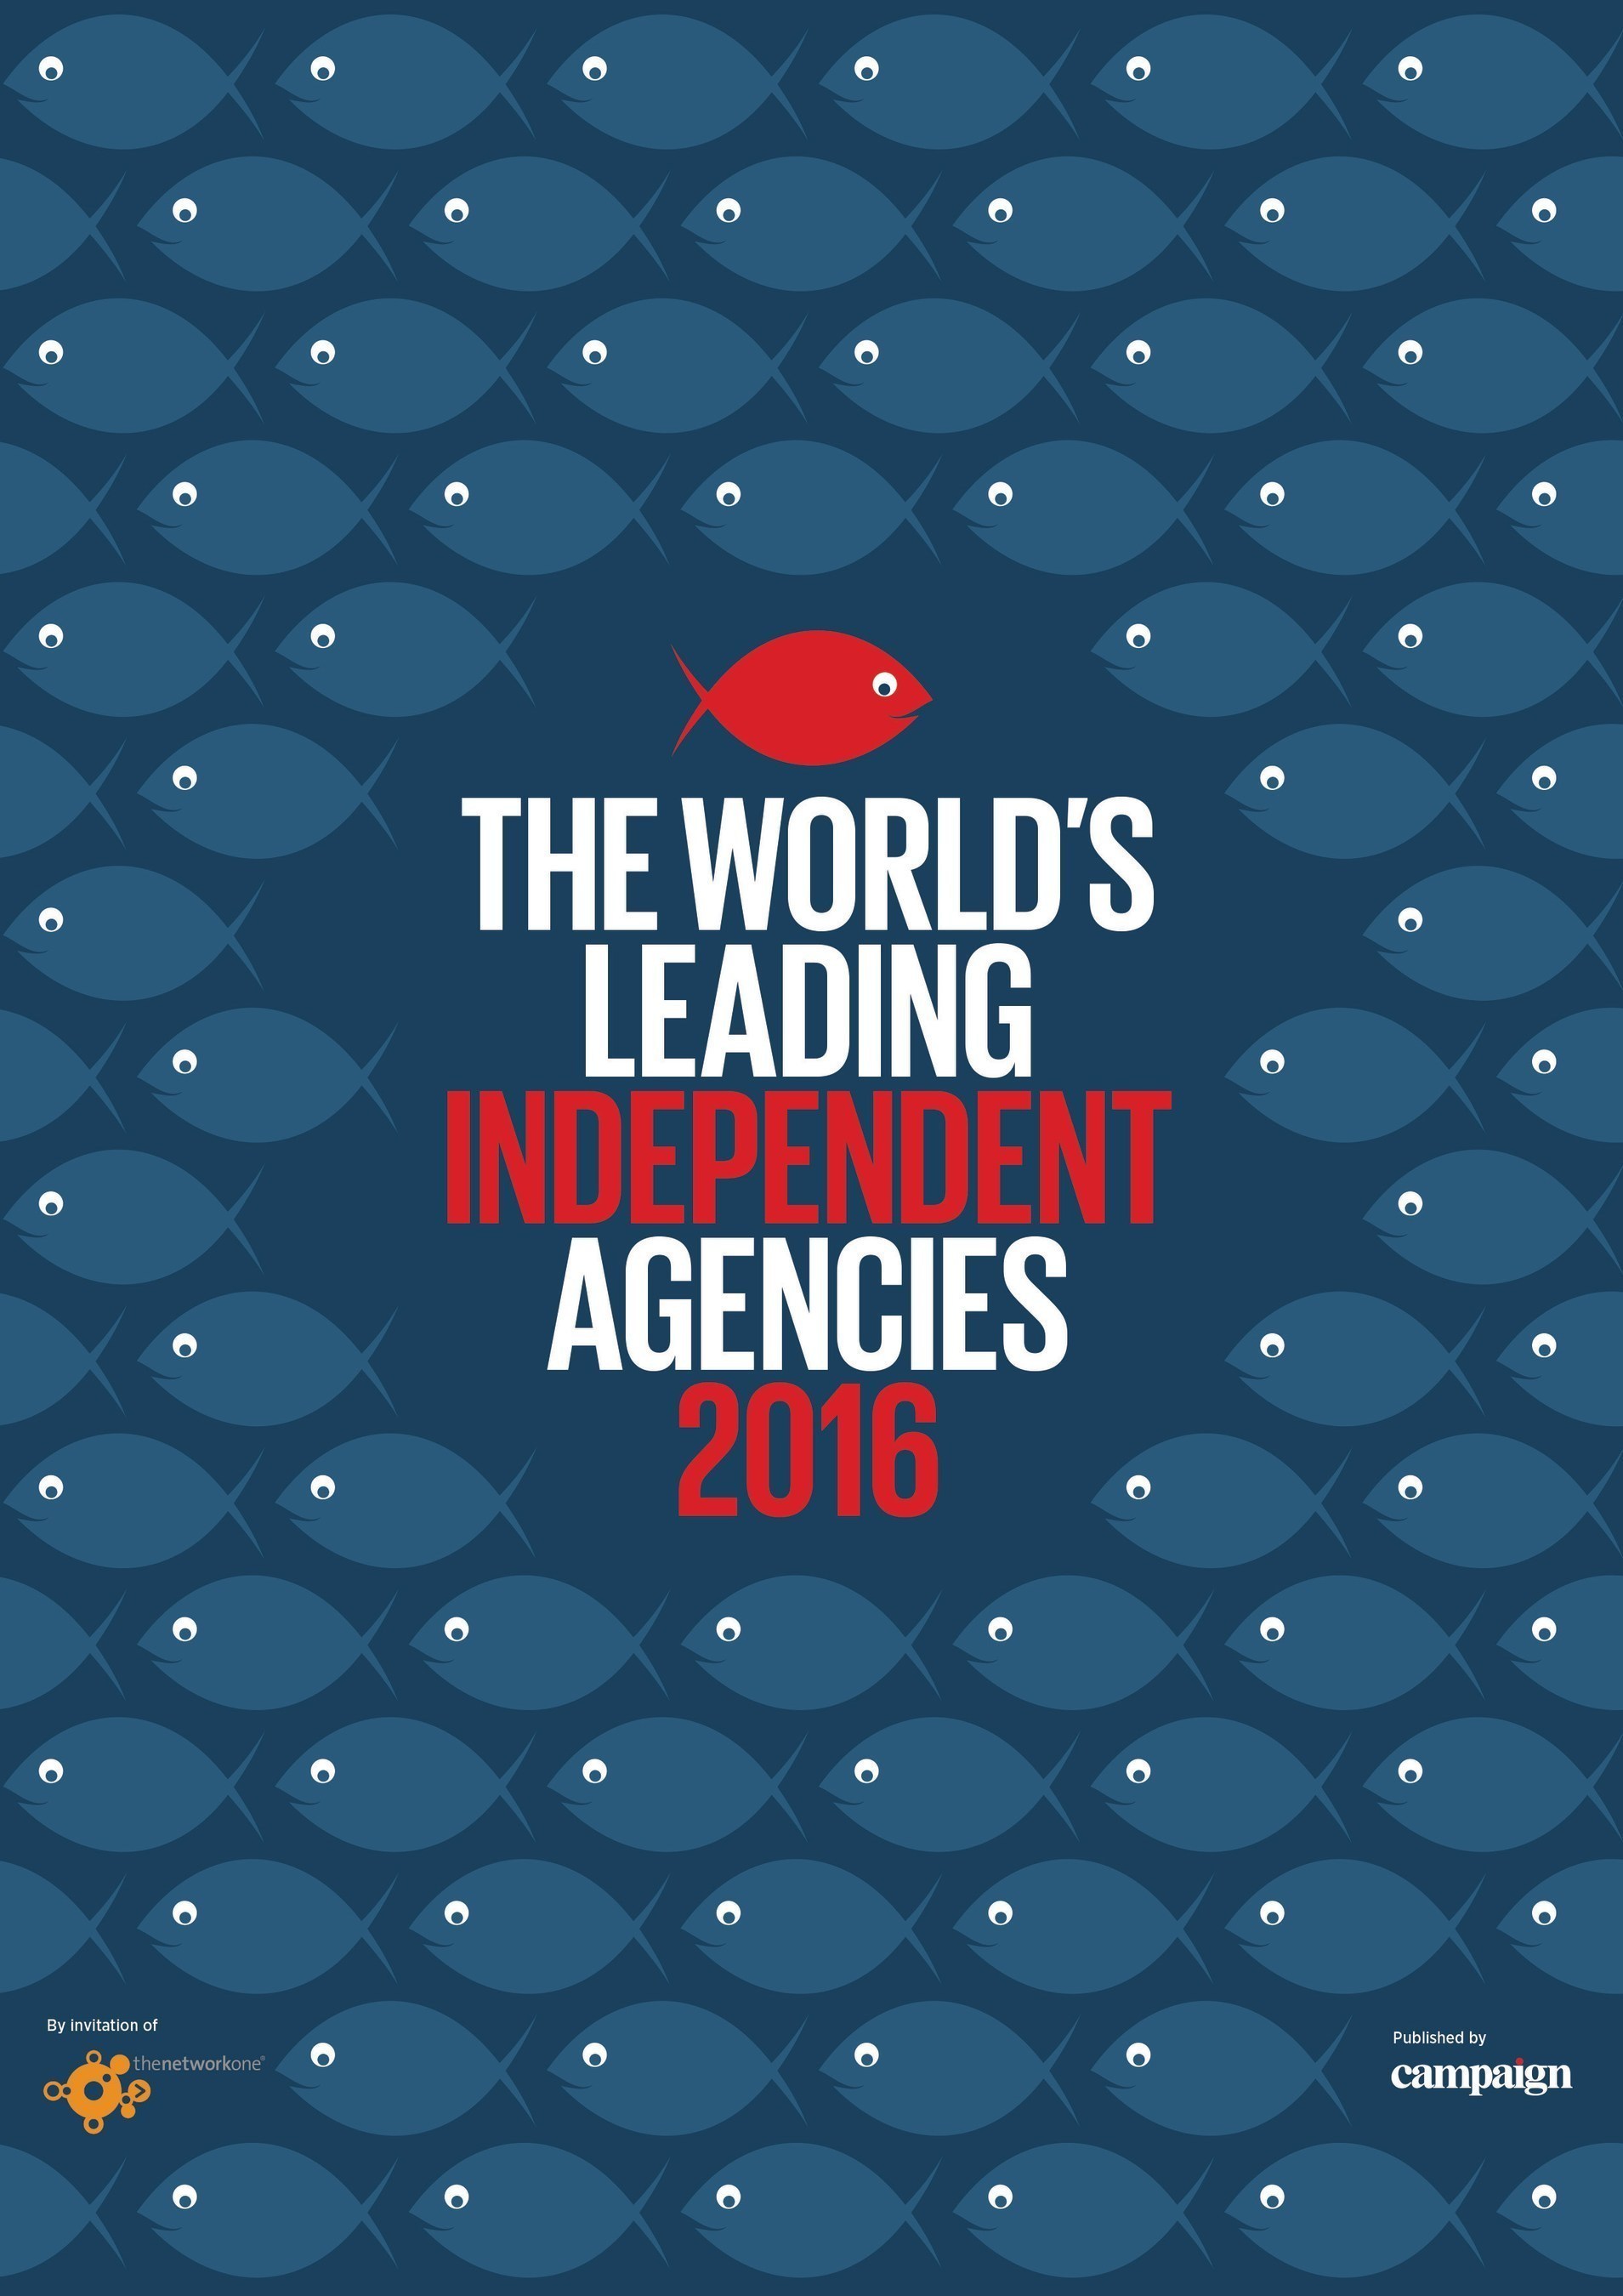 Nelson Schmidt Inc. is among the 2016 World's Leading Independent Agencies, which is published by Campaign magazine and thenetworkone.